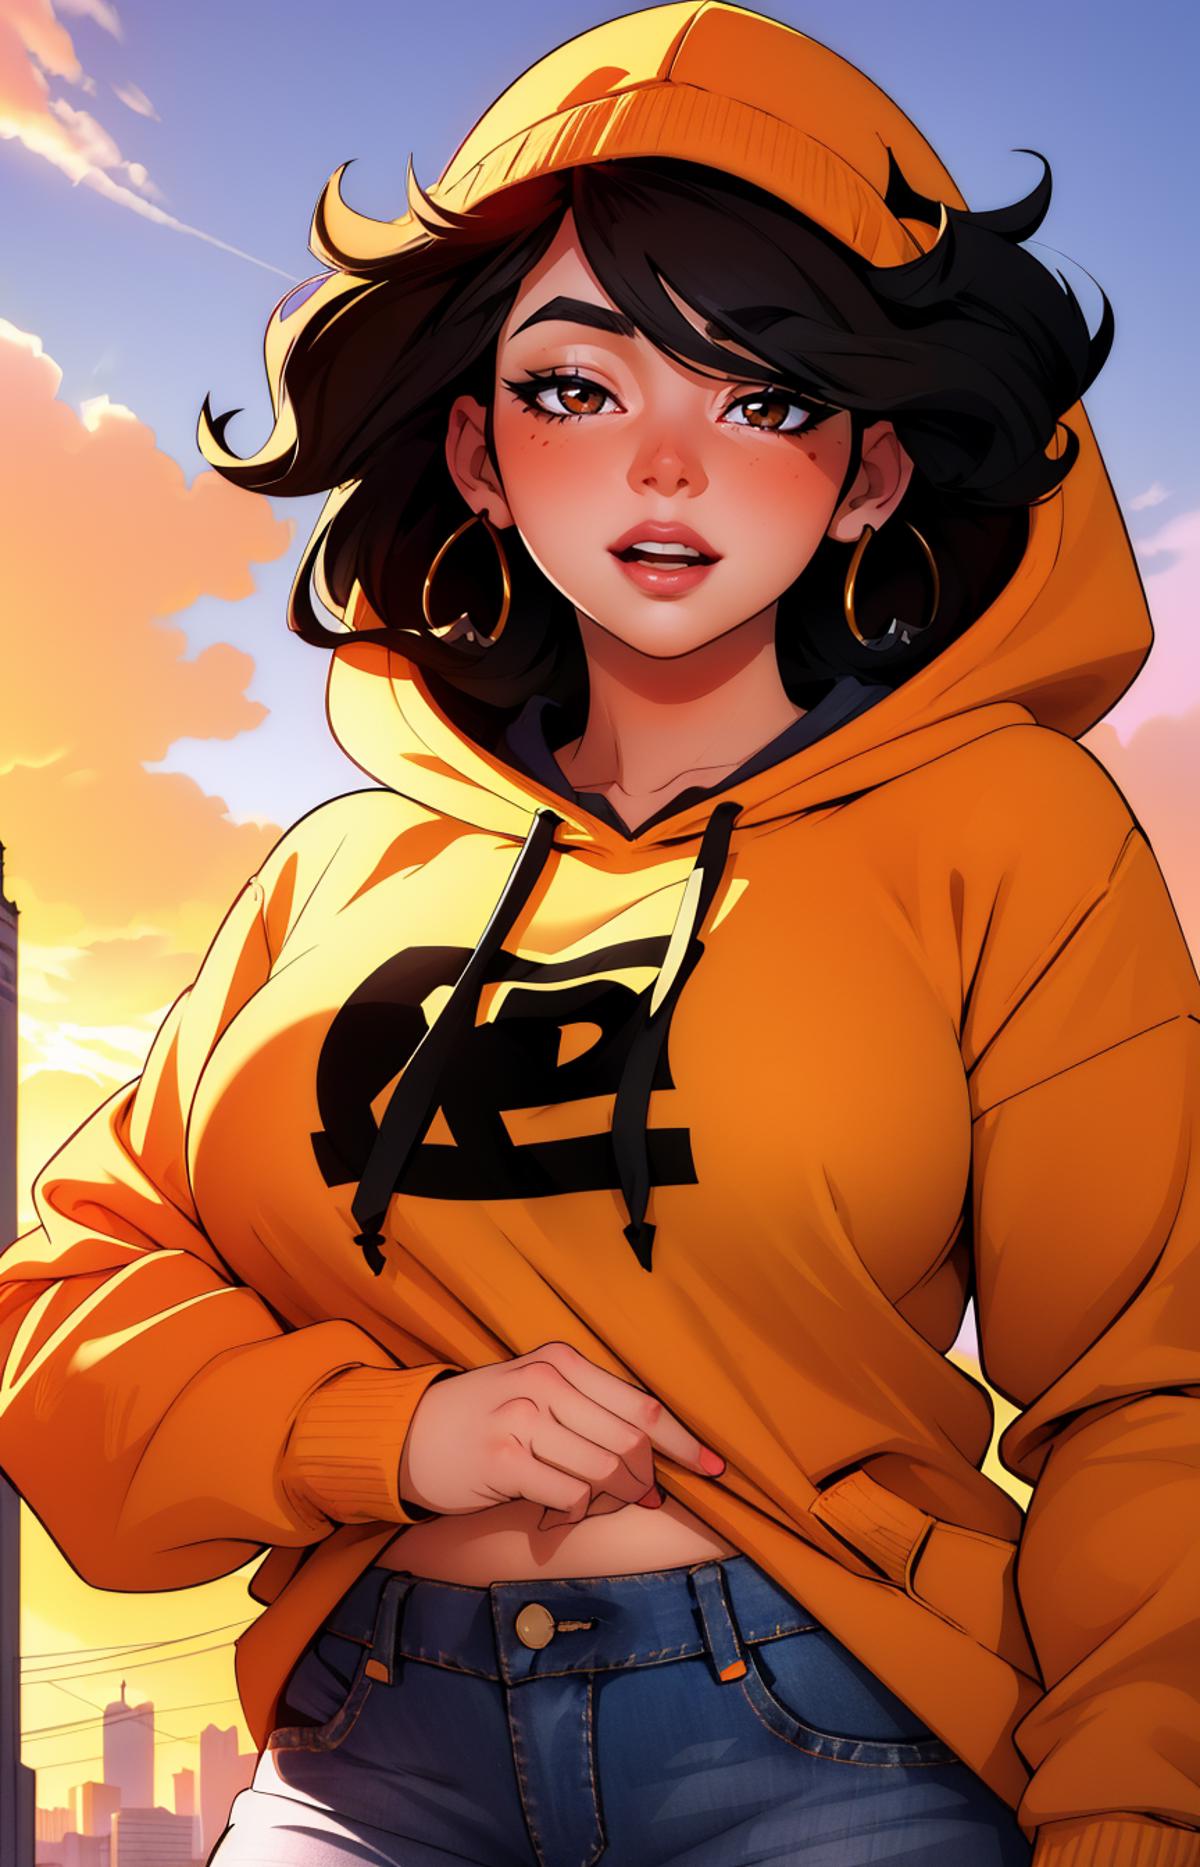 Cartoon Image of a Woman Wearing a Yellow Hoodie with the Letters "PB" on it